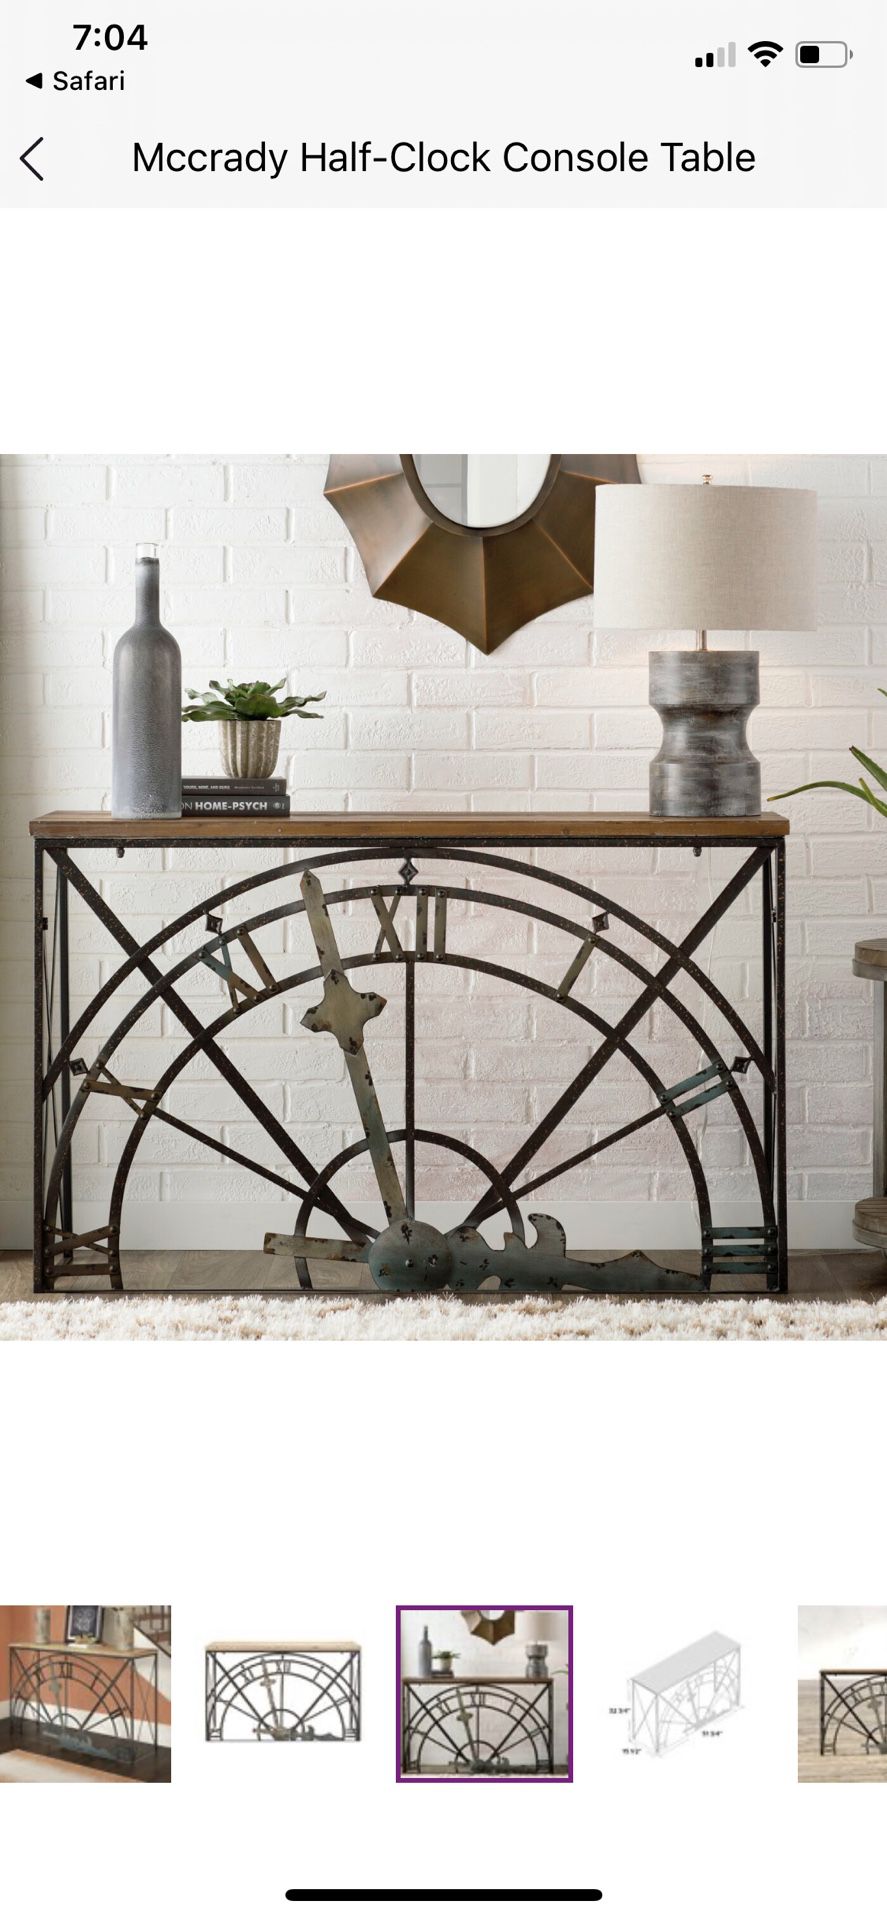 NEW REDUCED PRICE!!!!UNOPENED Half clock Console Table FOR SALE